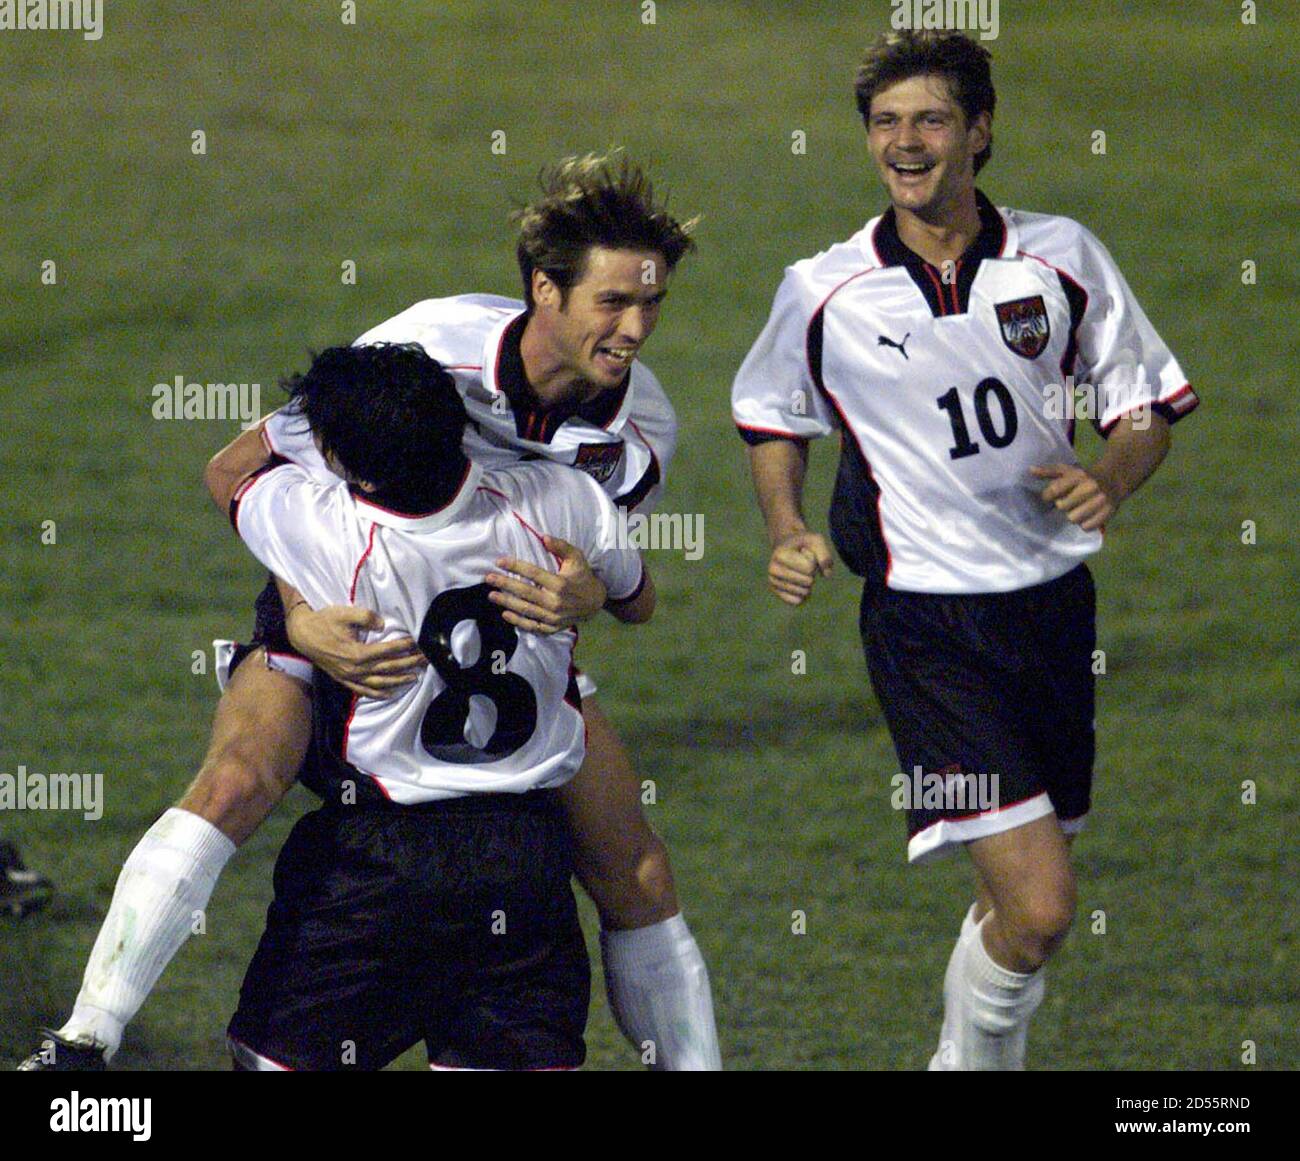 Austria's Harald Cerny (top) celebrates his goal as he jumps at Didi Kuehbauer while their teammate Haqnnes Reinmayr (R) looks on during their Euro 2000 qualifying match against Cyprus October 10.  LE/JDP Stock Photo